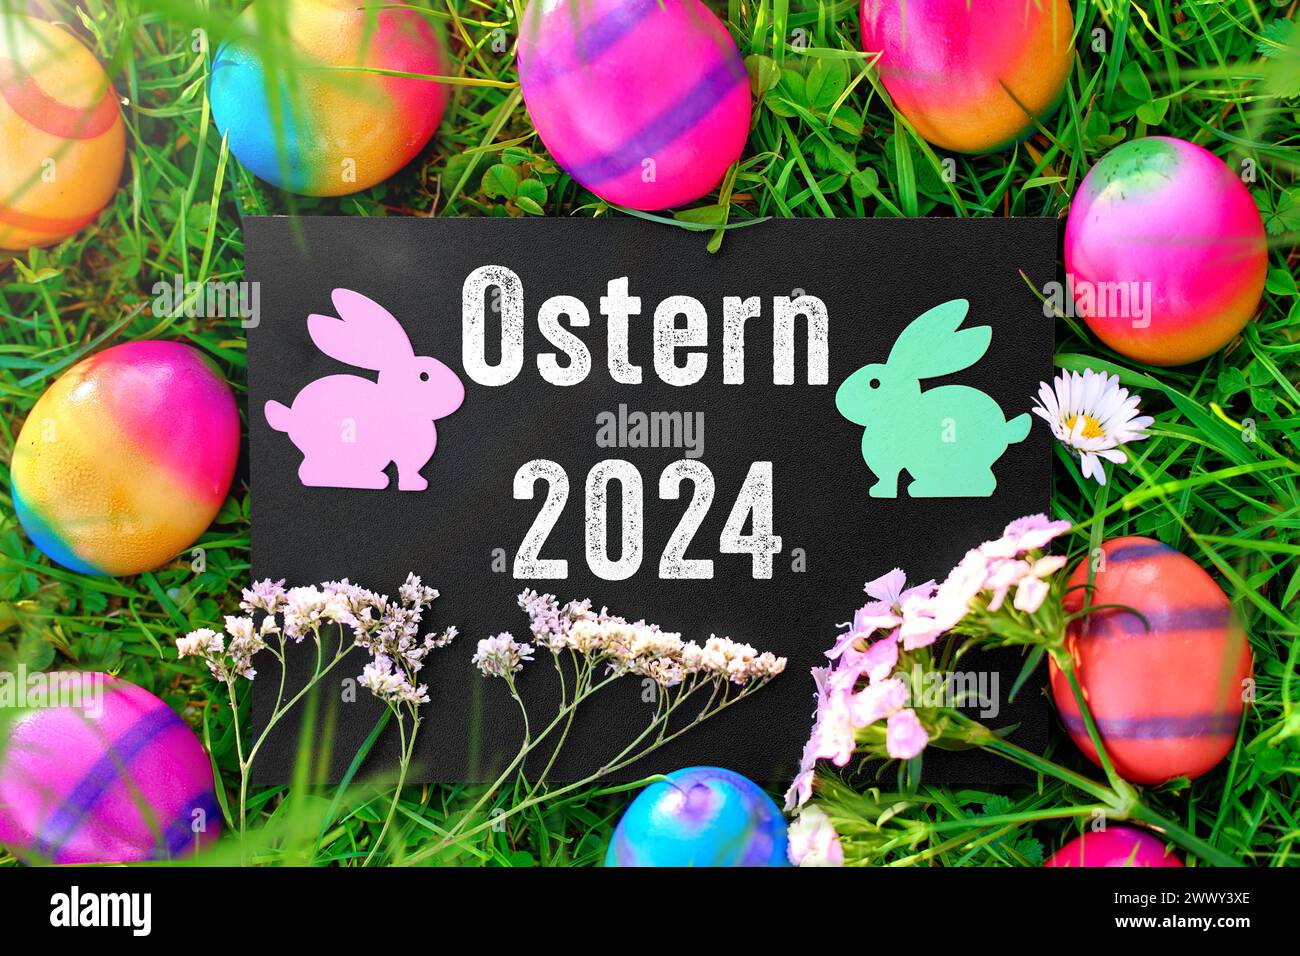 26 March 2024: Easter 2024, lettering on a board in a green meadow with colorful Easter eggs and Easter bunny figures. PHOTOMONTAGE *** Ostern 2024, Schriftzug auf einer Tafel in einer grünen Wiese mit bunten Ostereiern und Osterhasen Figuren. FOTOMONTAGE Stock Photo